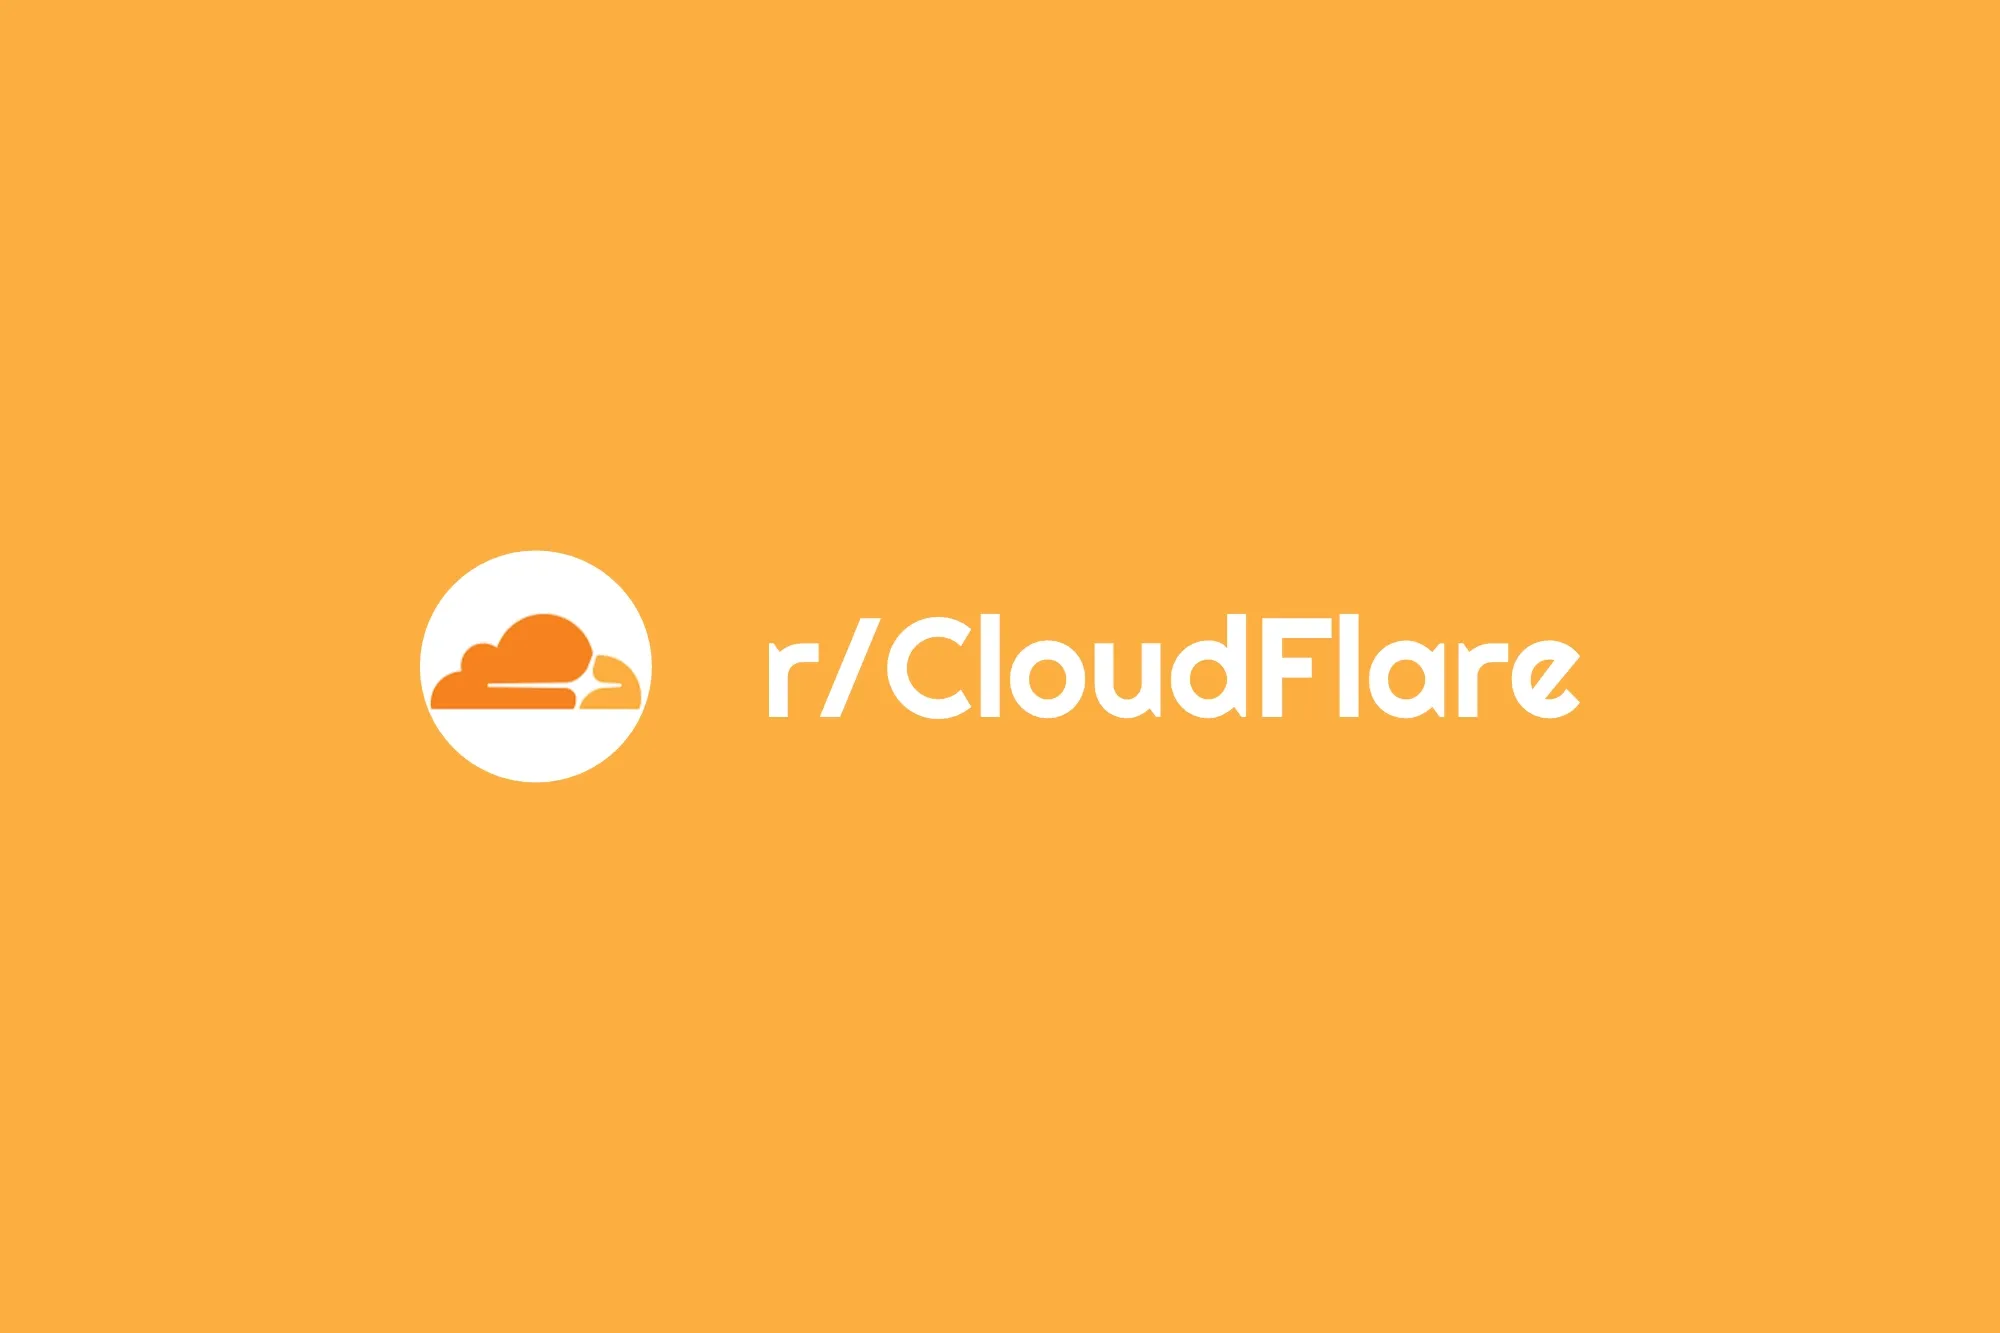 r/CloudFlare: Can I secure public tunnel endpoint so only certain IP can connect?